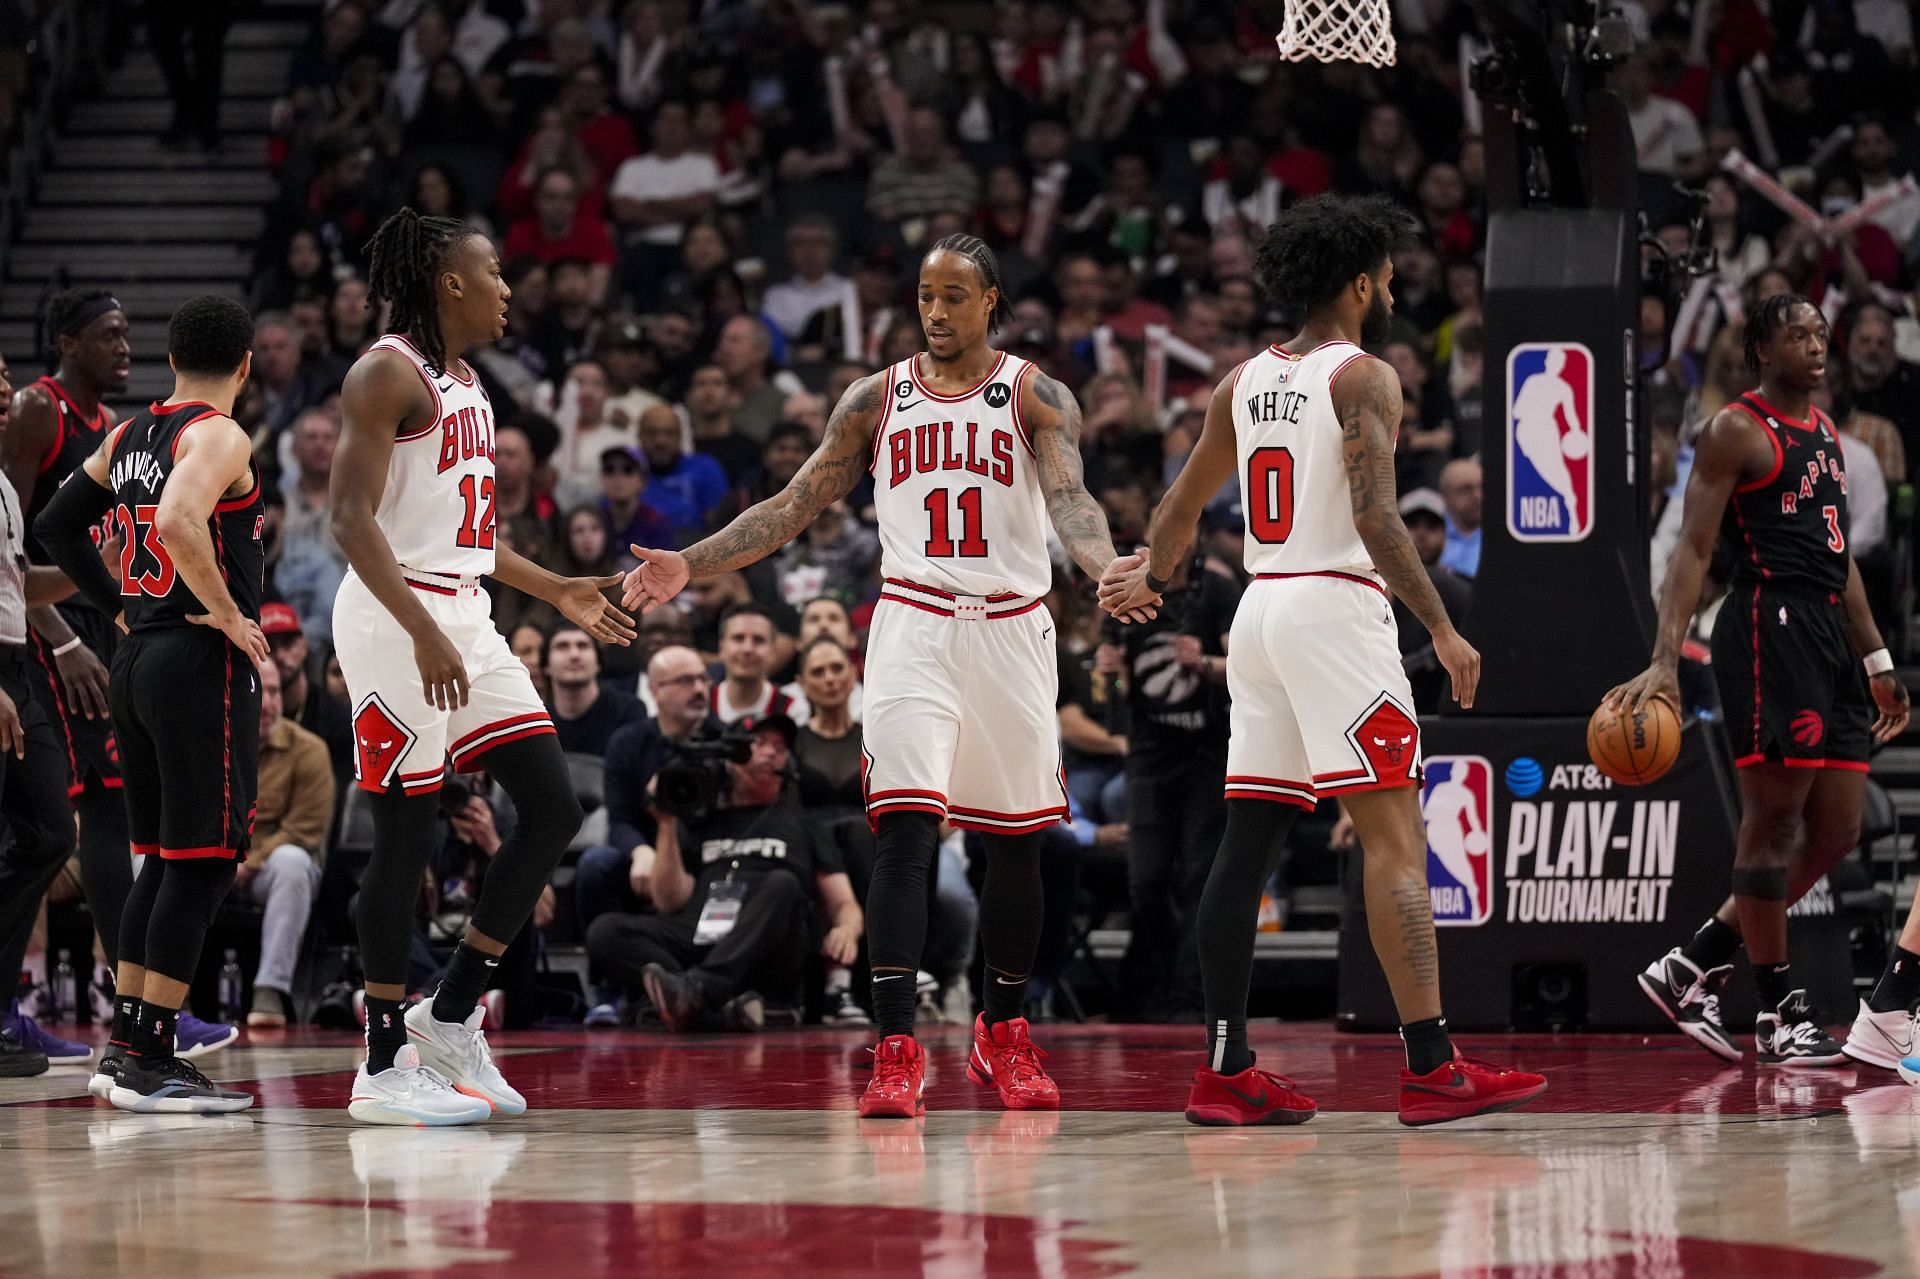 The Chicago Bulls rallied from a 19-point deficit to beat the Toronto Raptors on the road.